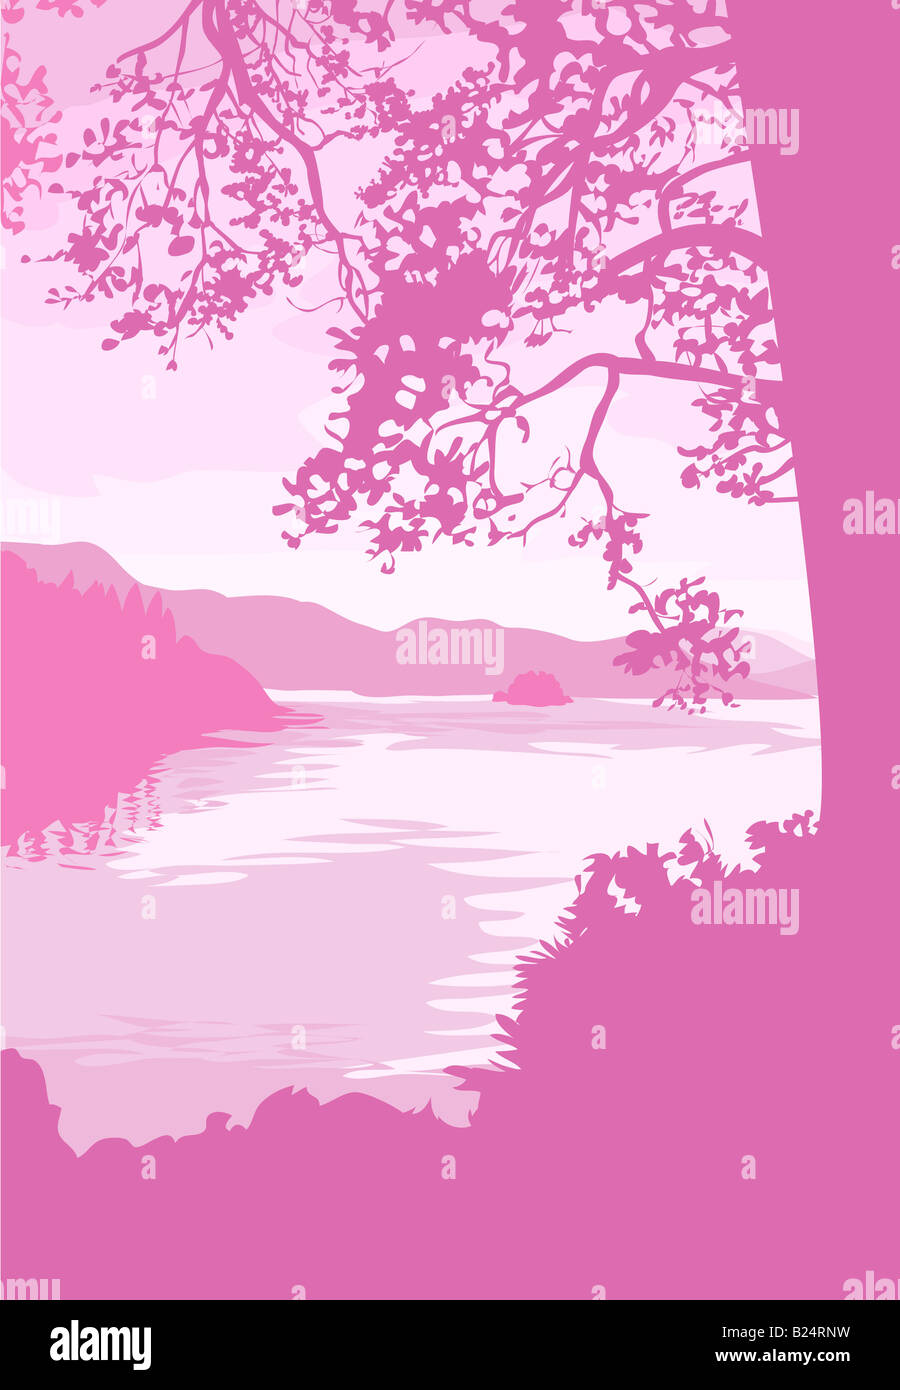 lake background. A beautiful lake scene background. File includes several different colour versions Stock Photo